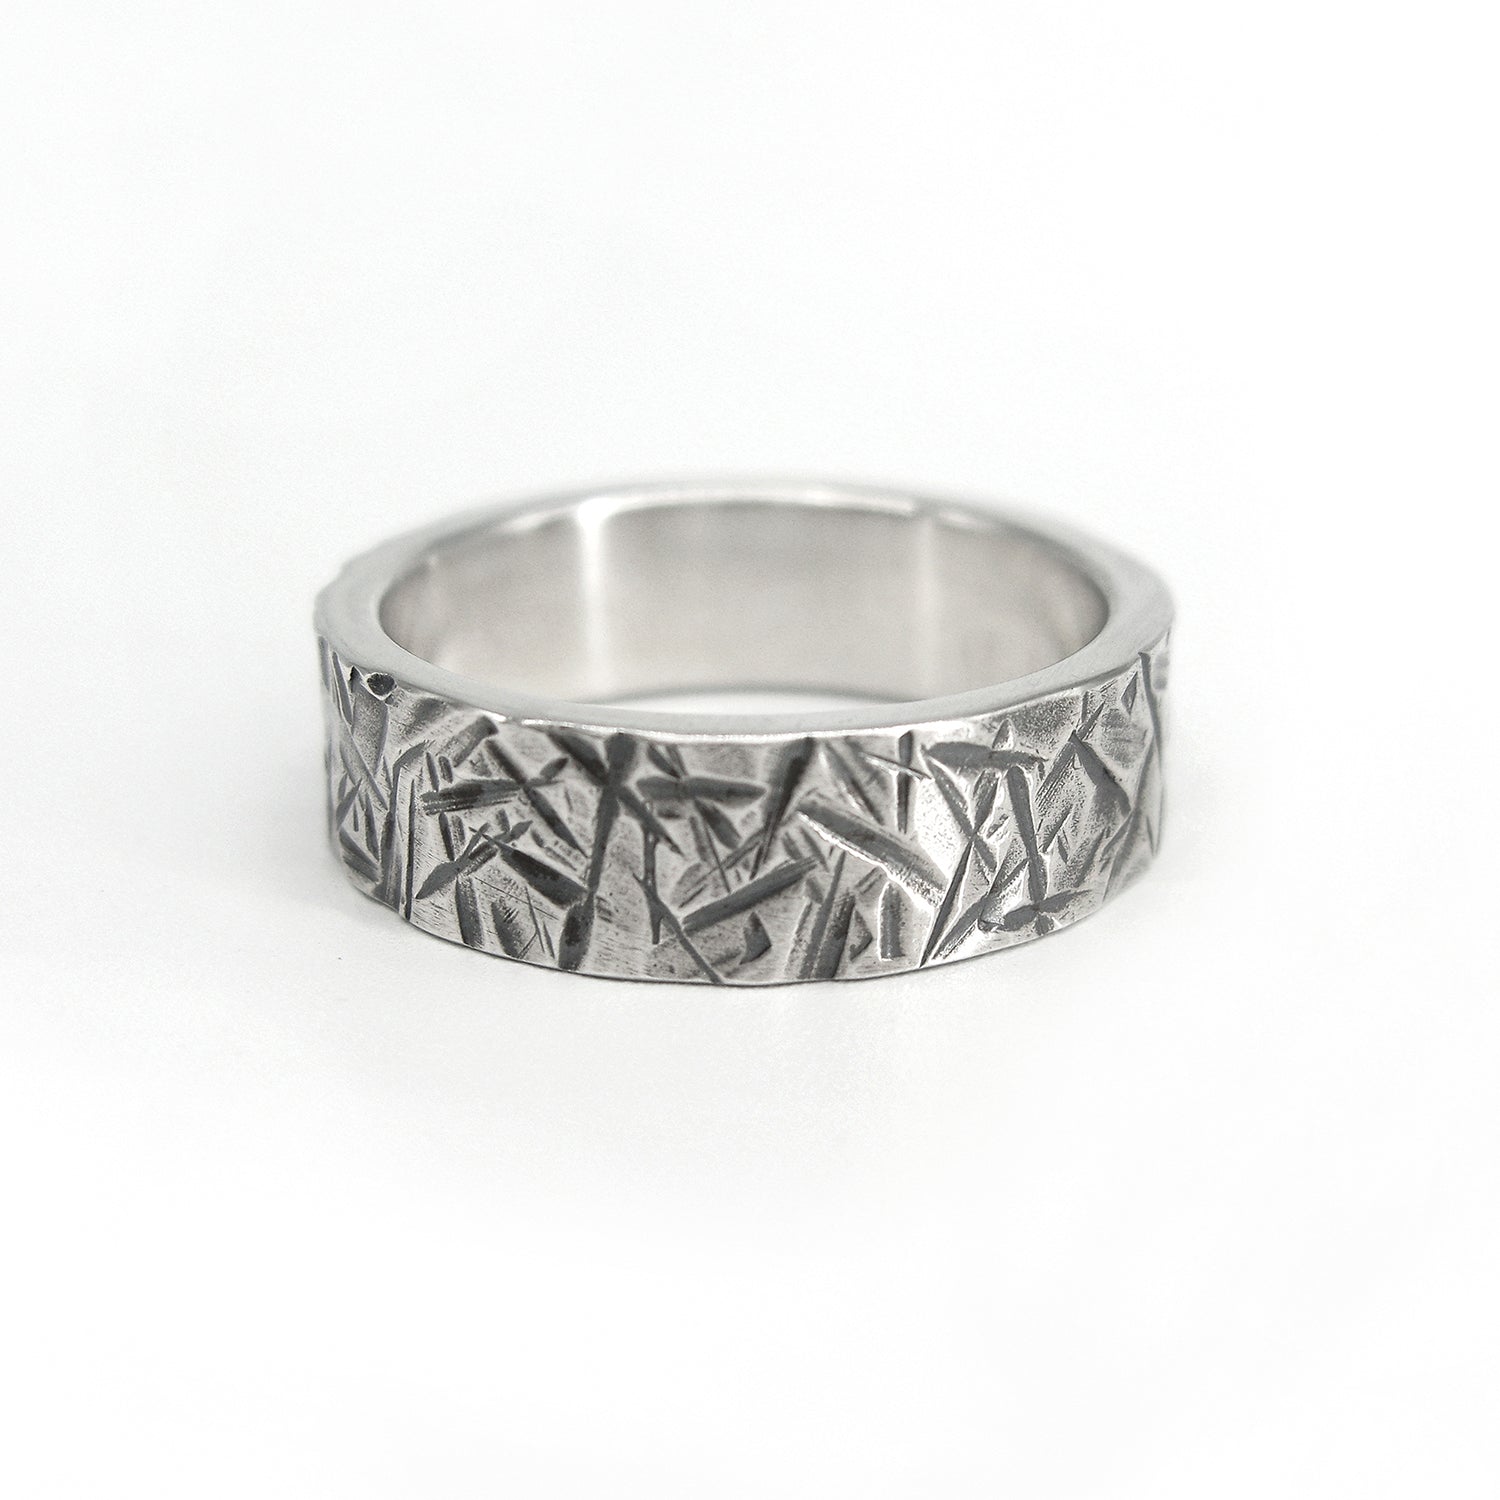 Rough6 silver ring